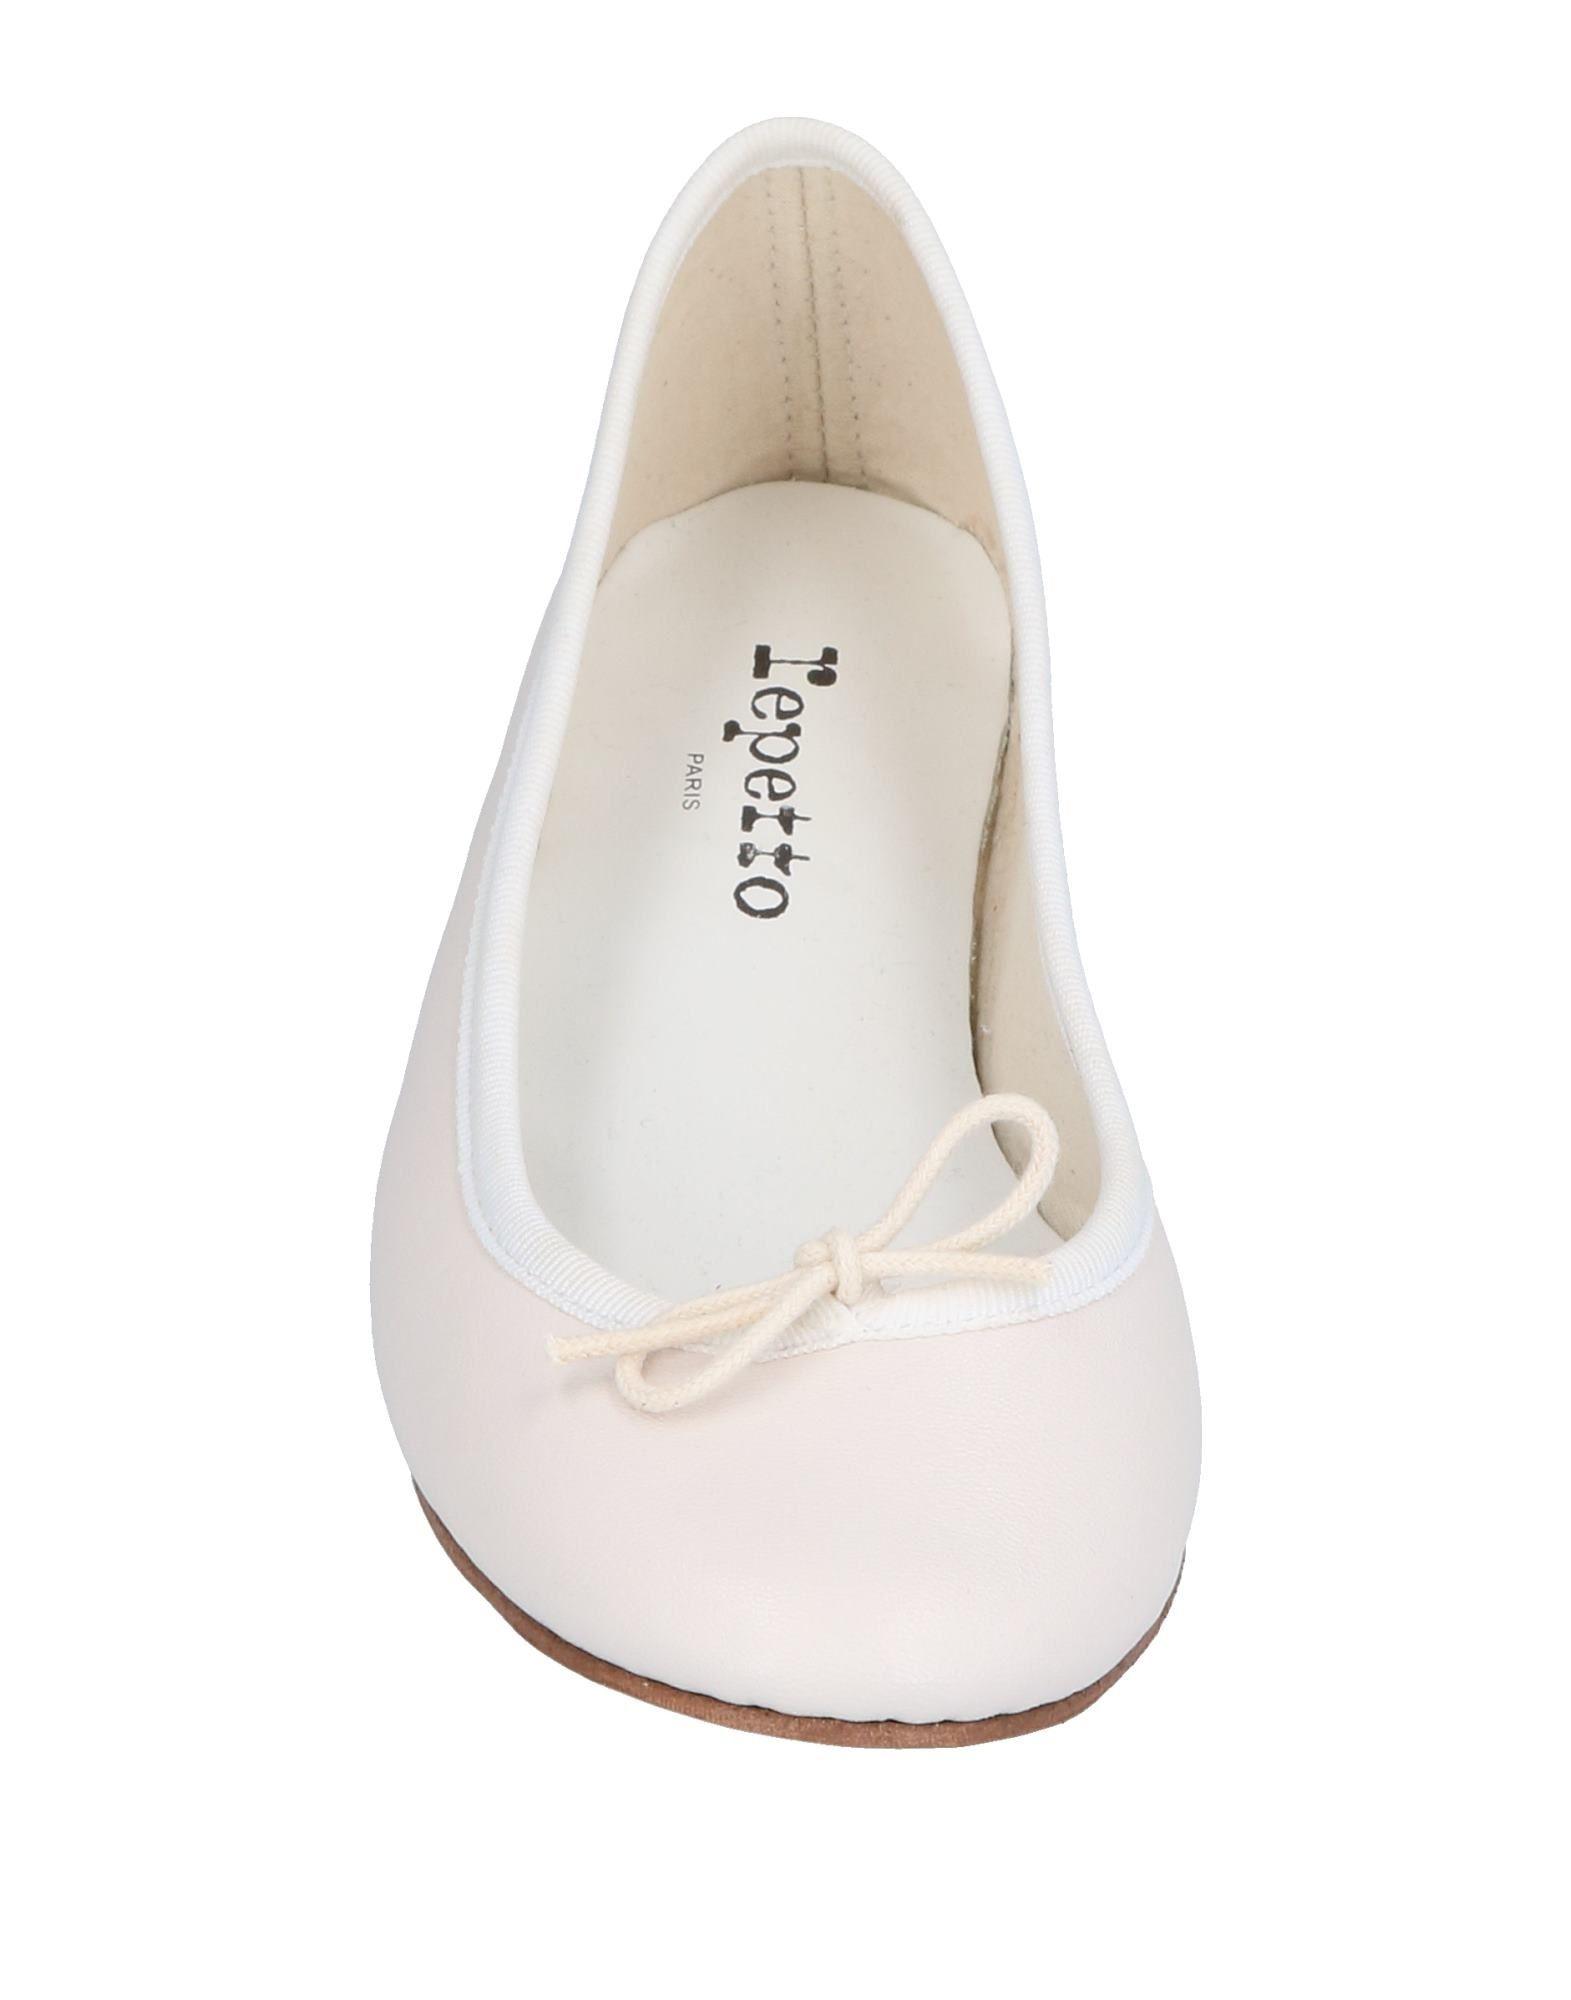 Repetto Leather Ballet Flats in Ivory (White) - Lyst